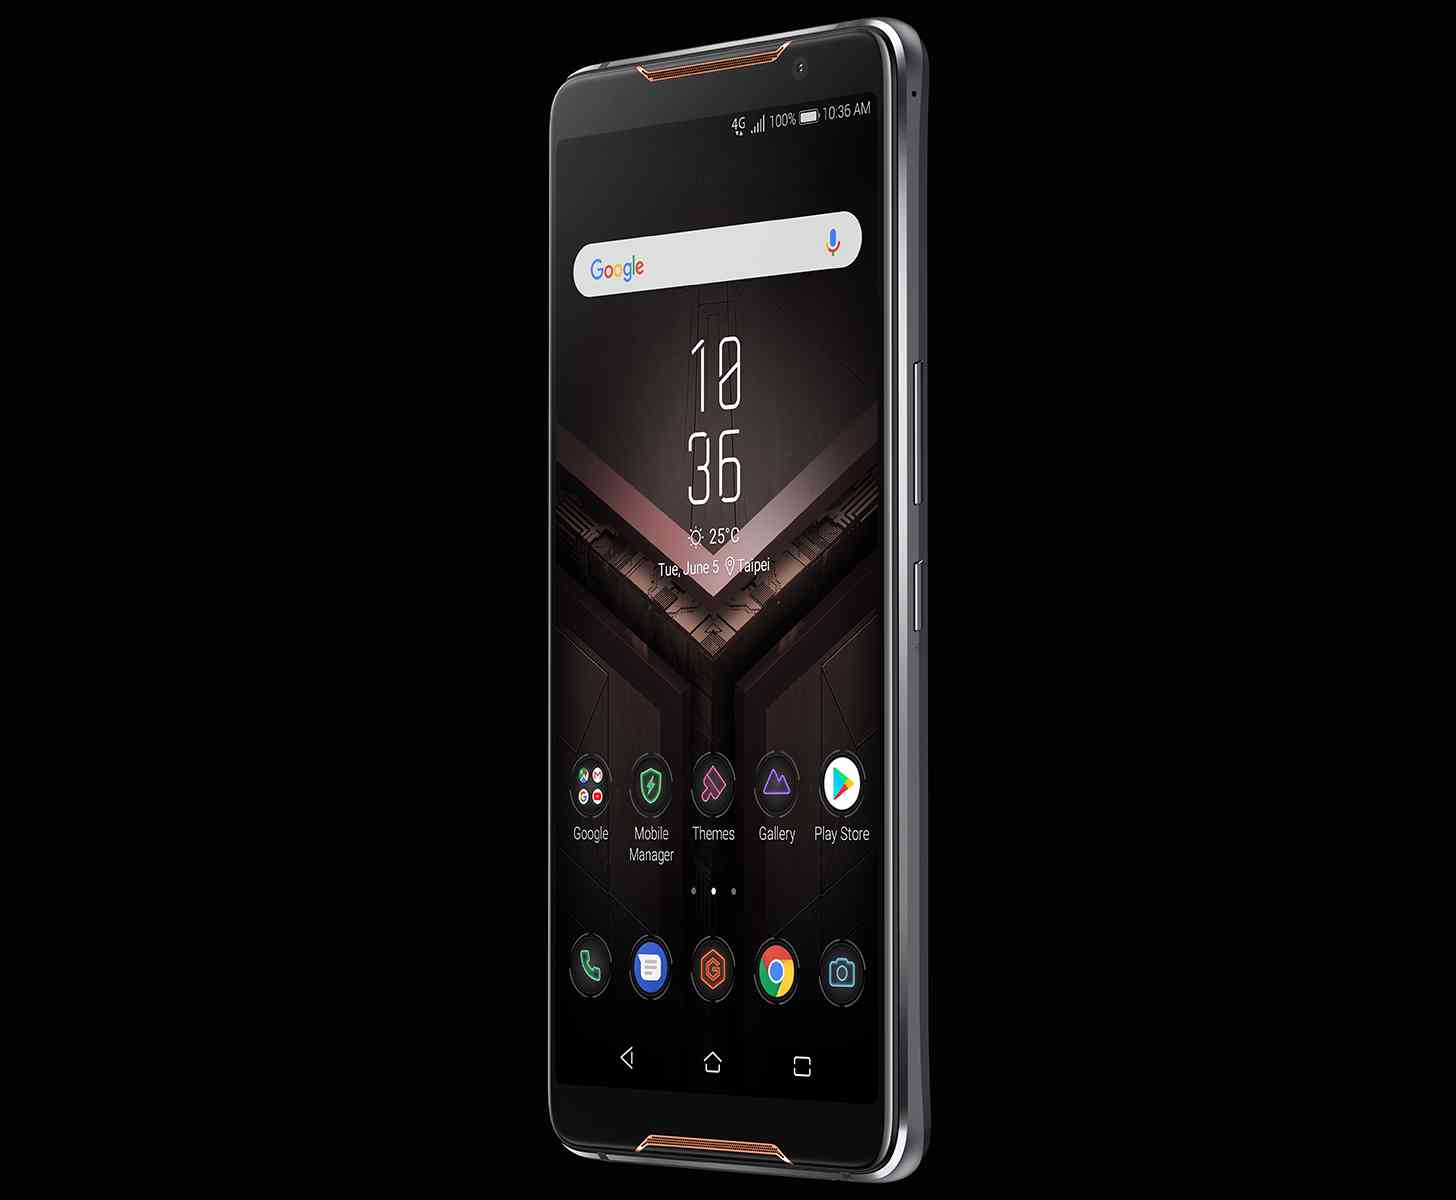 ASUS ROG Phone official